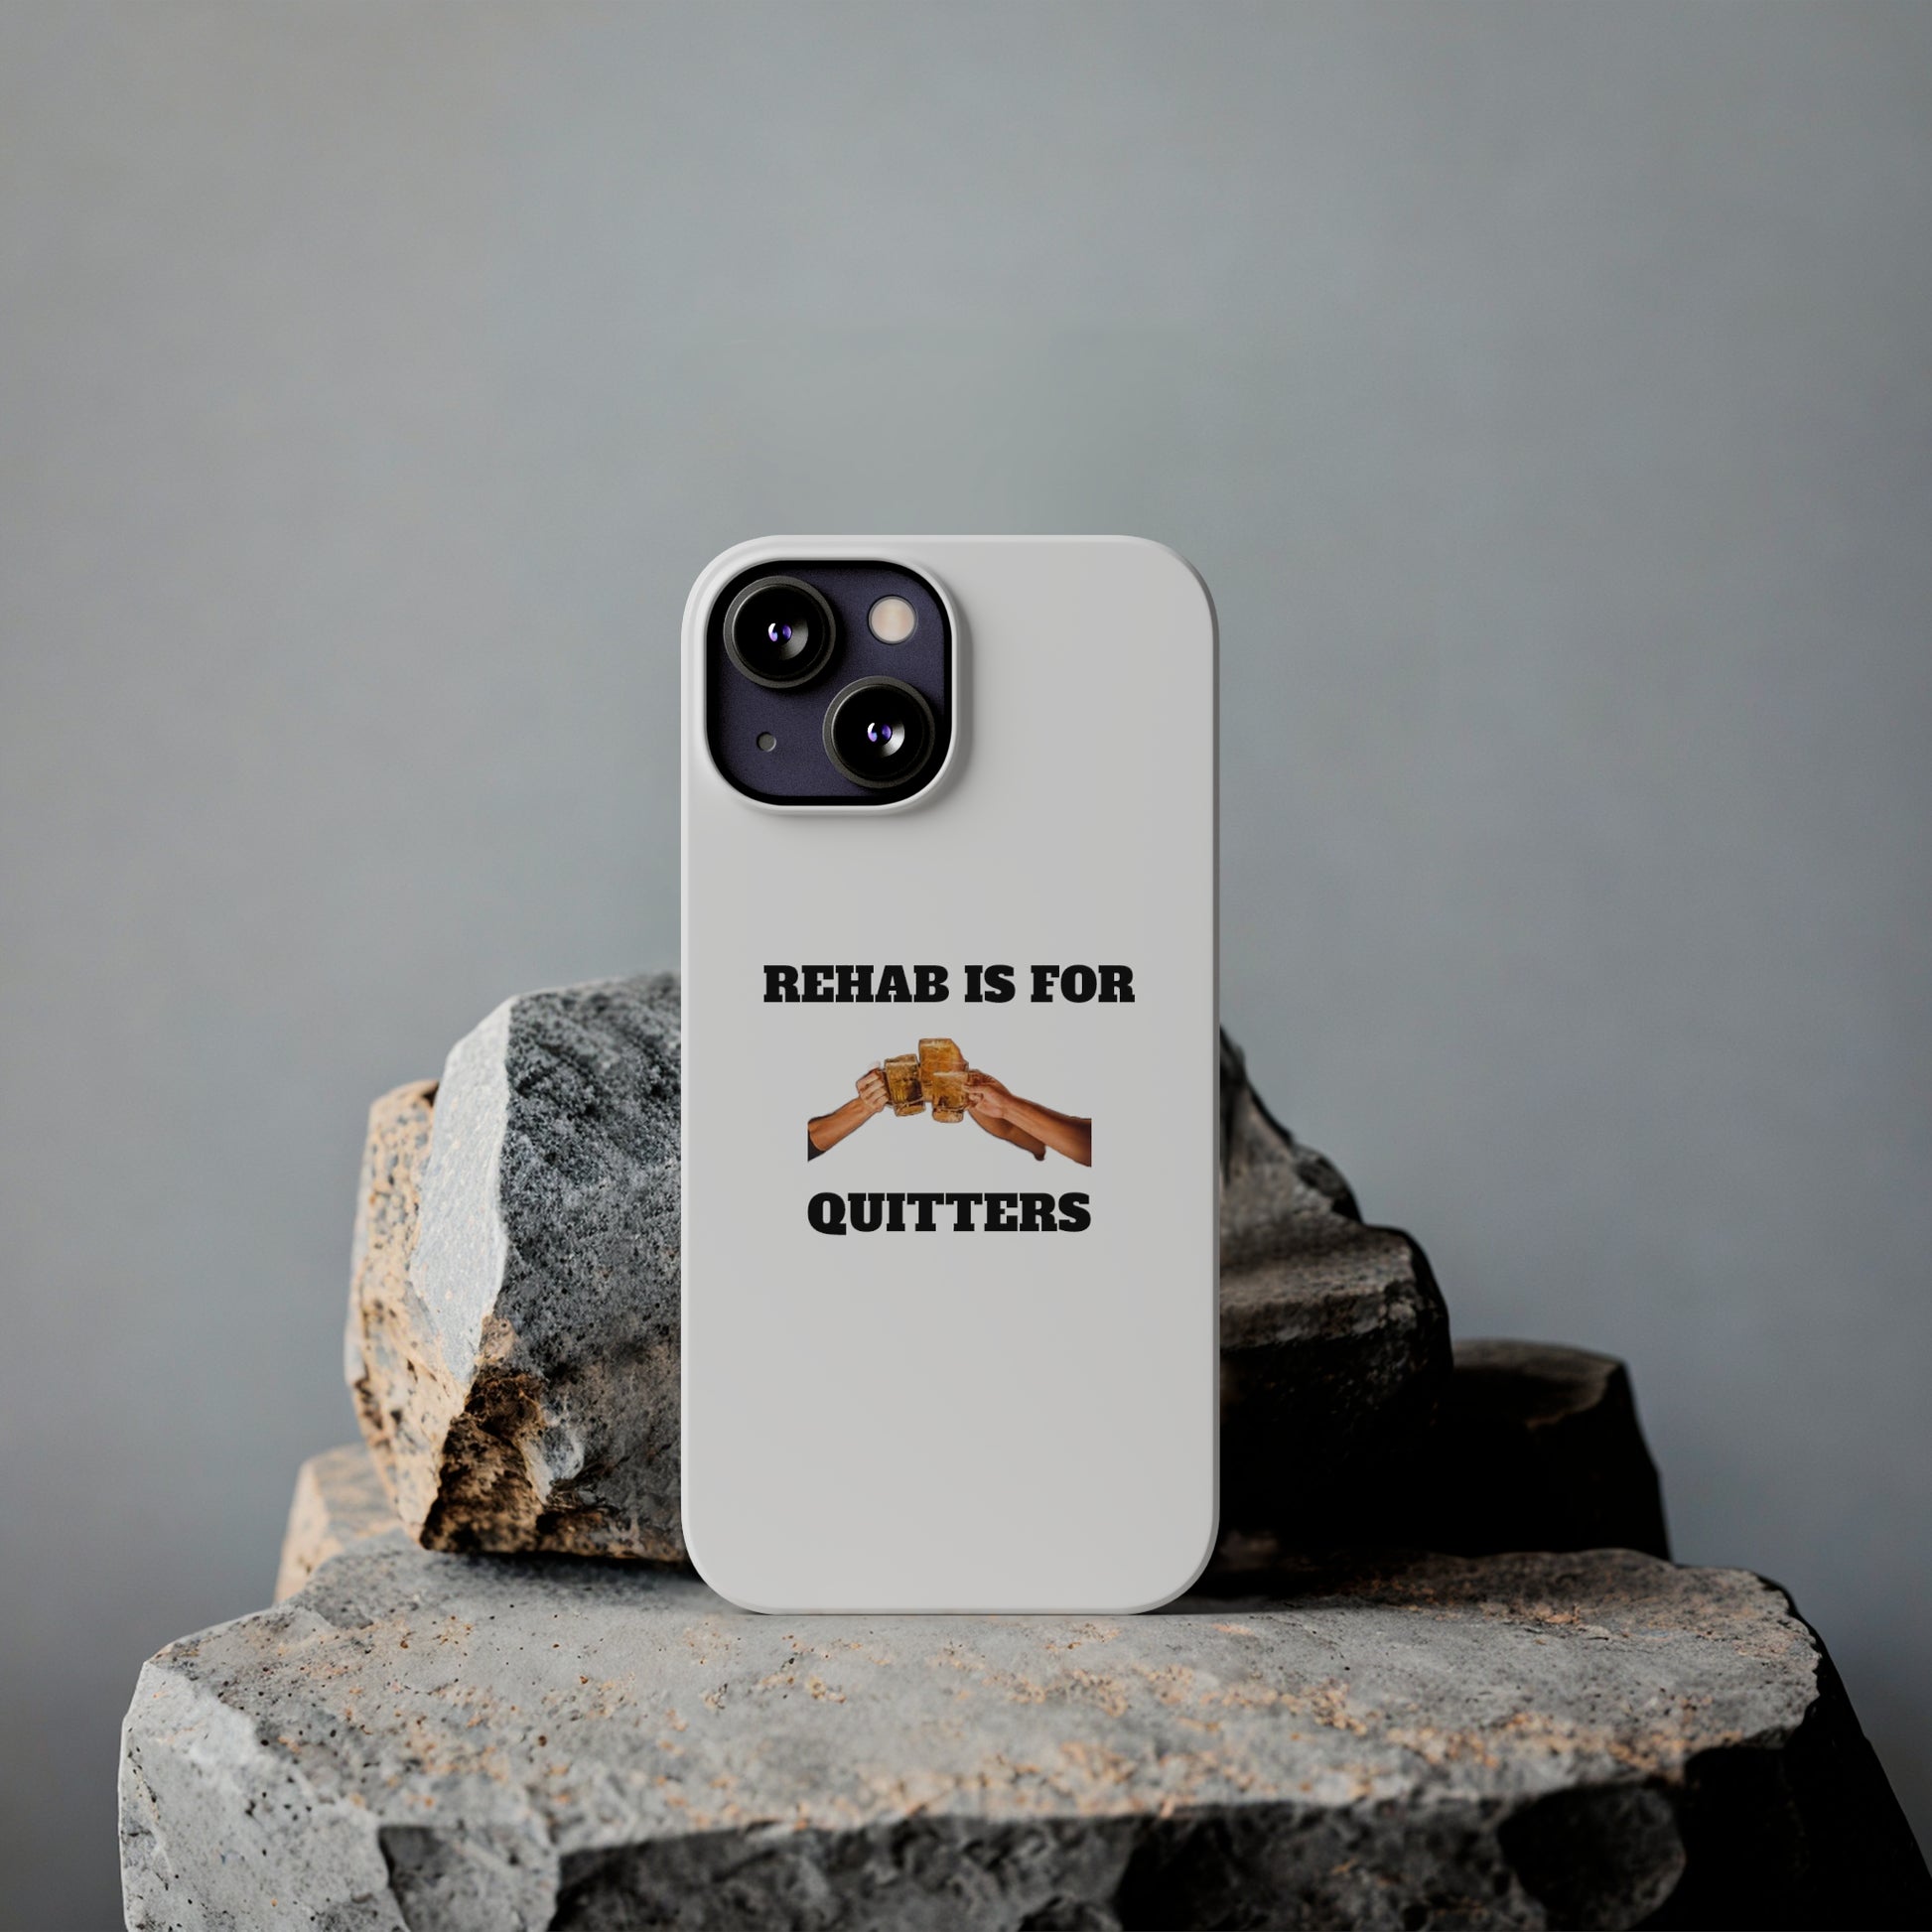 "Rehab Is For Quitters" Phone Cases